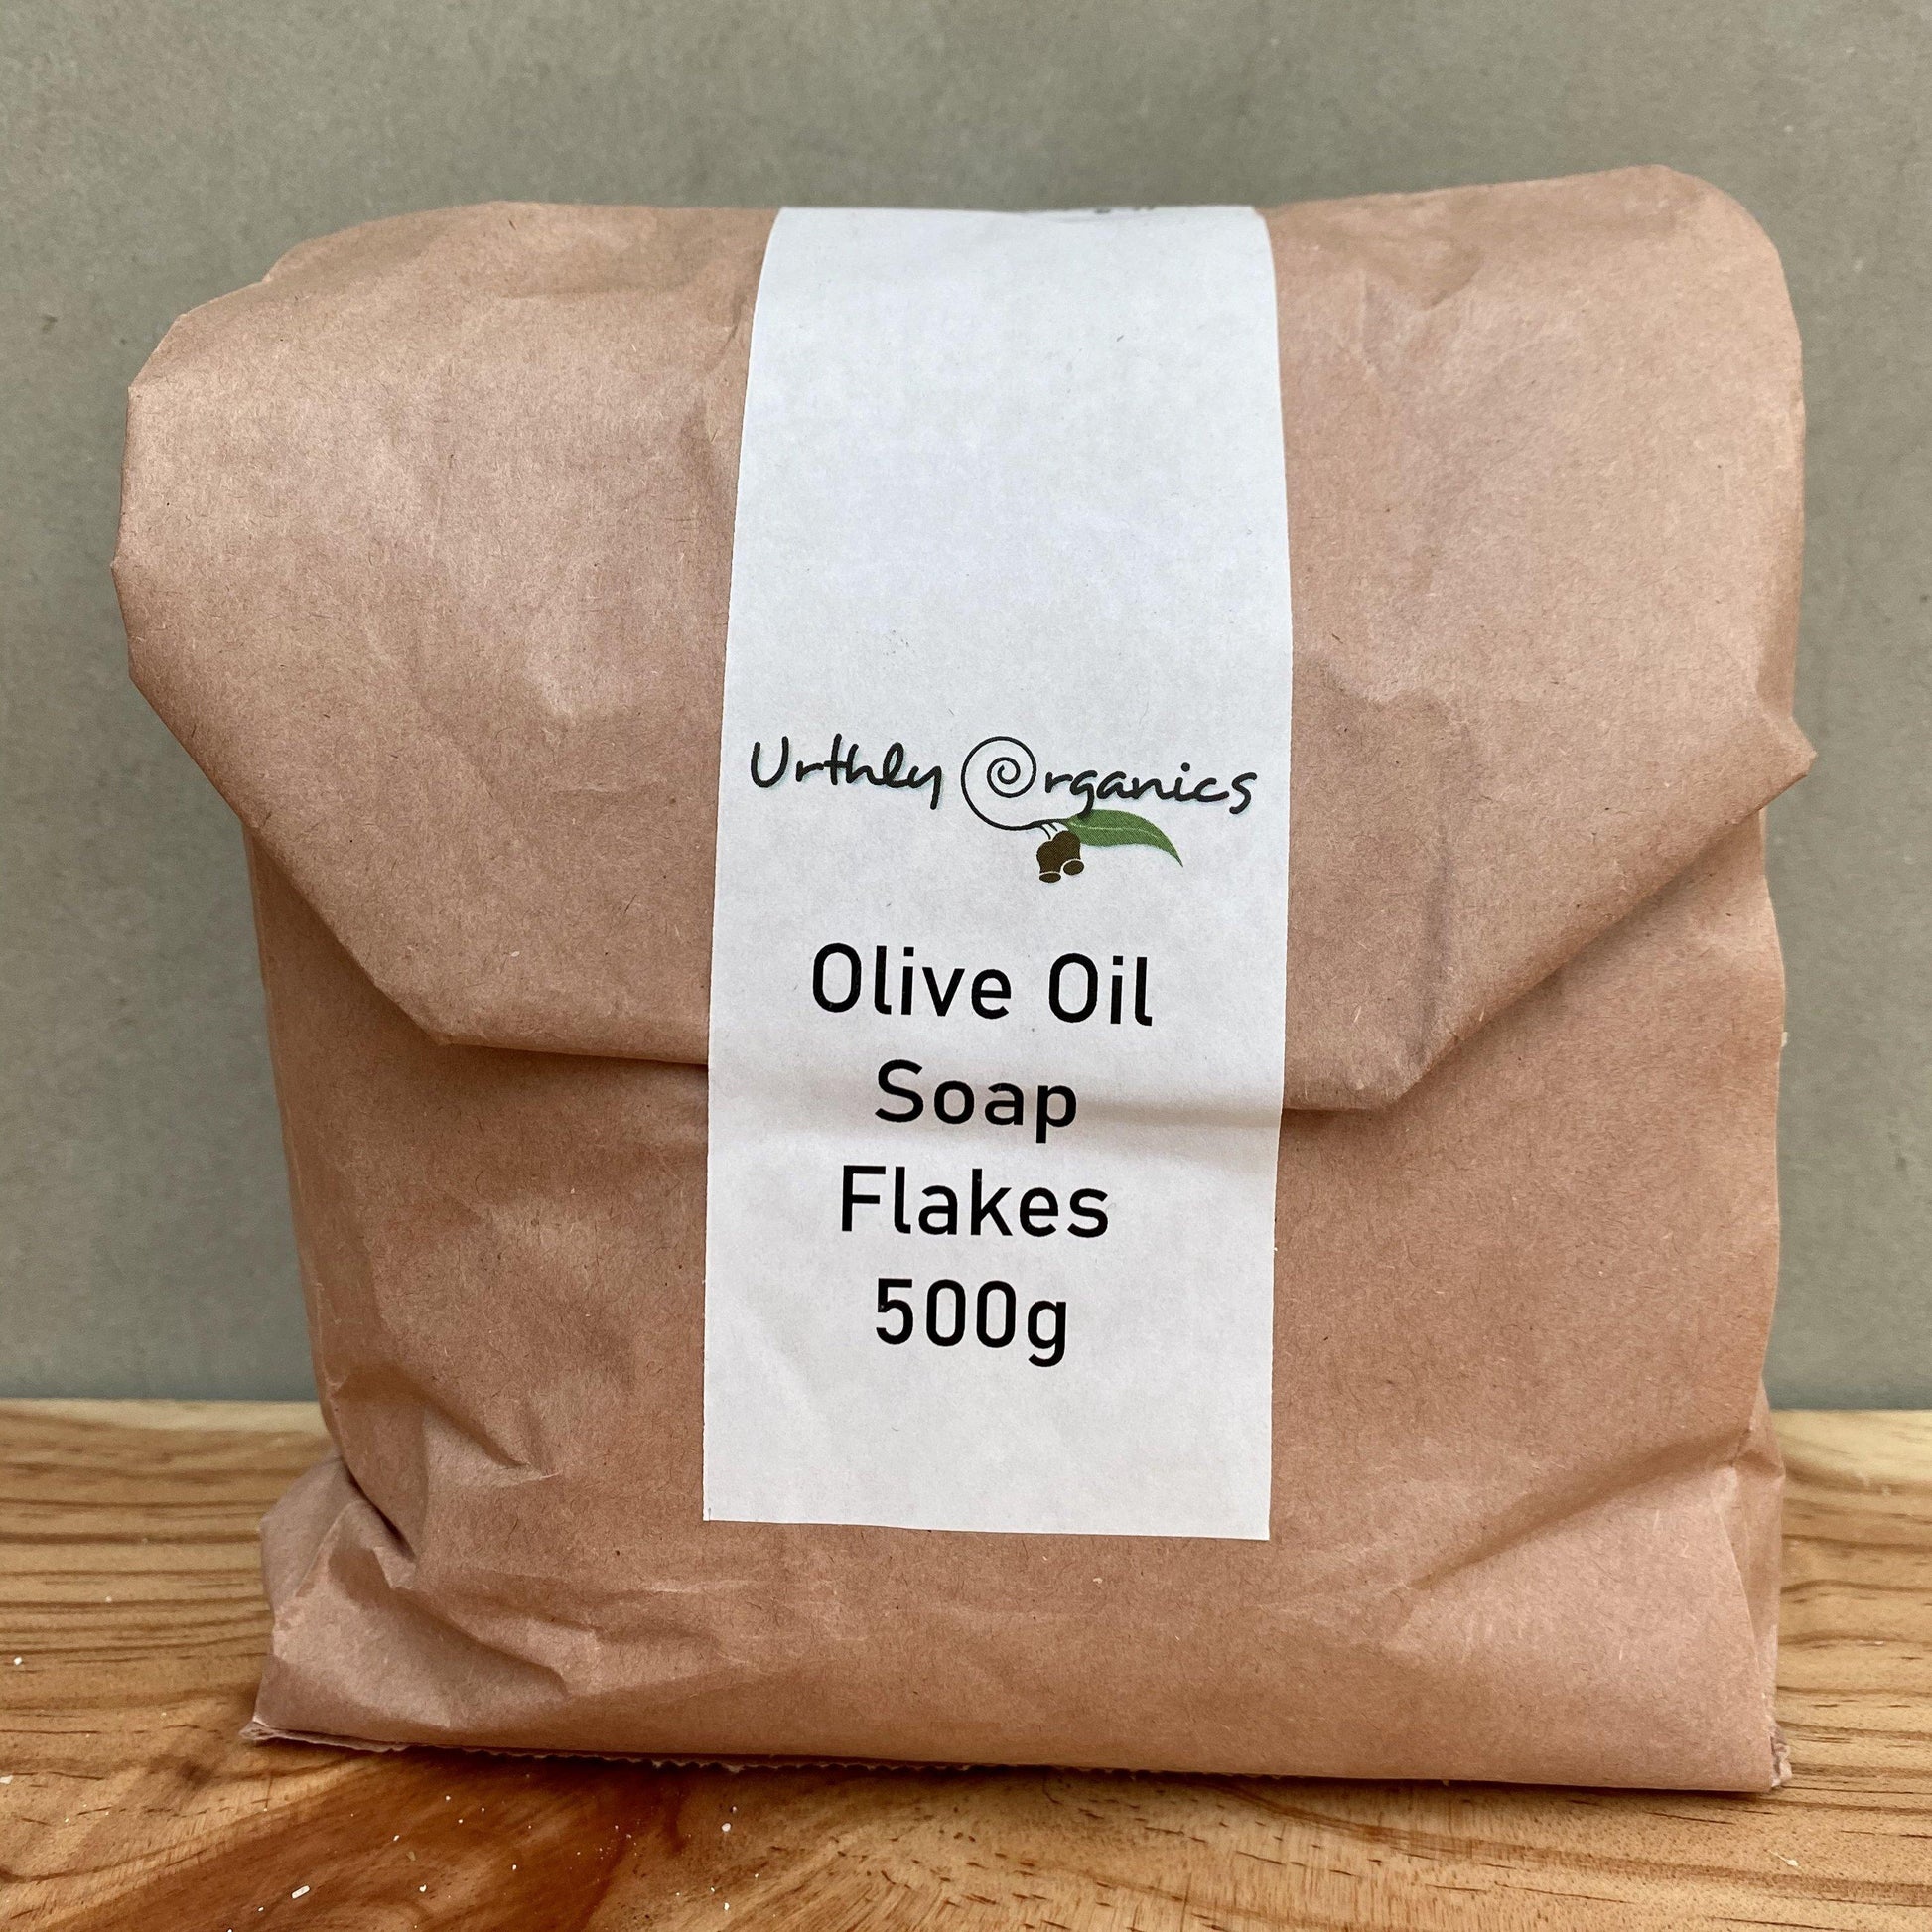 Olive Oil Soap Flakes 500g - UrthlyOrganics Natural ethical skincare and cleaning